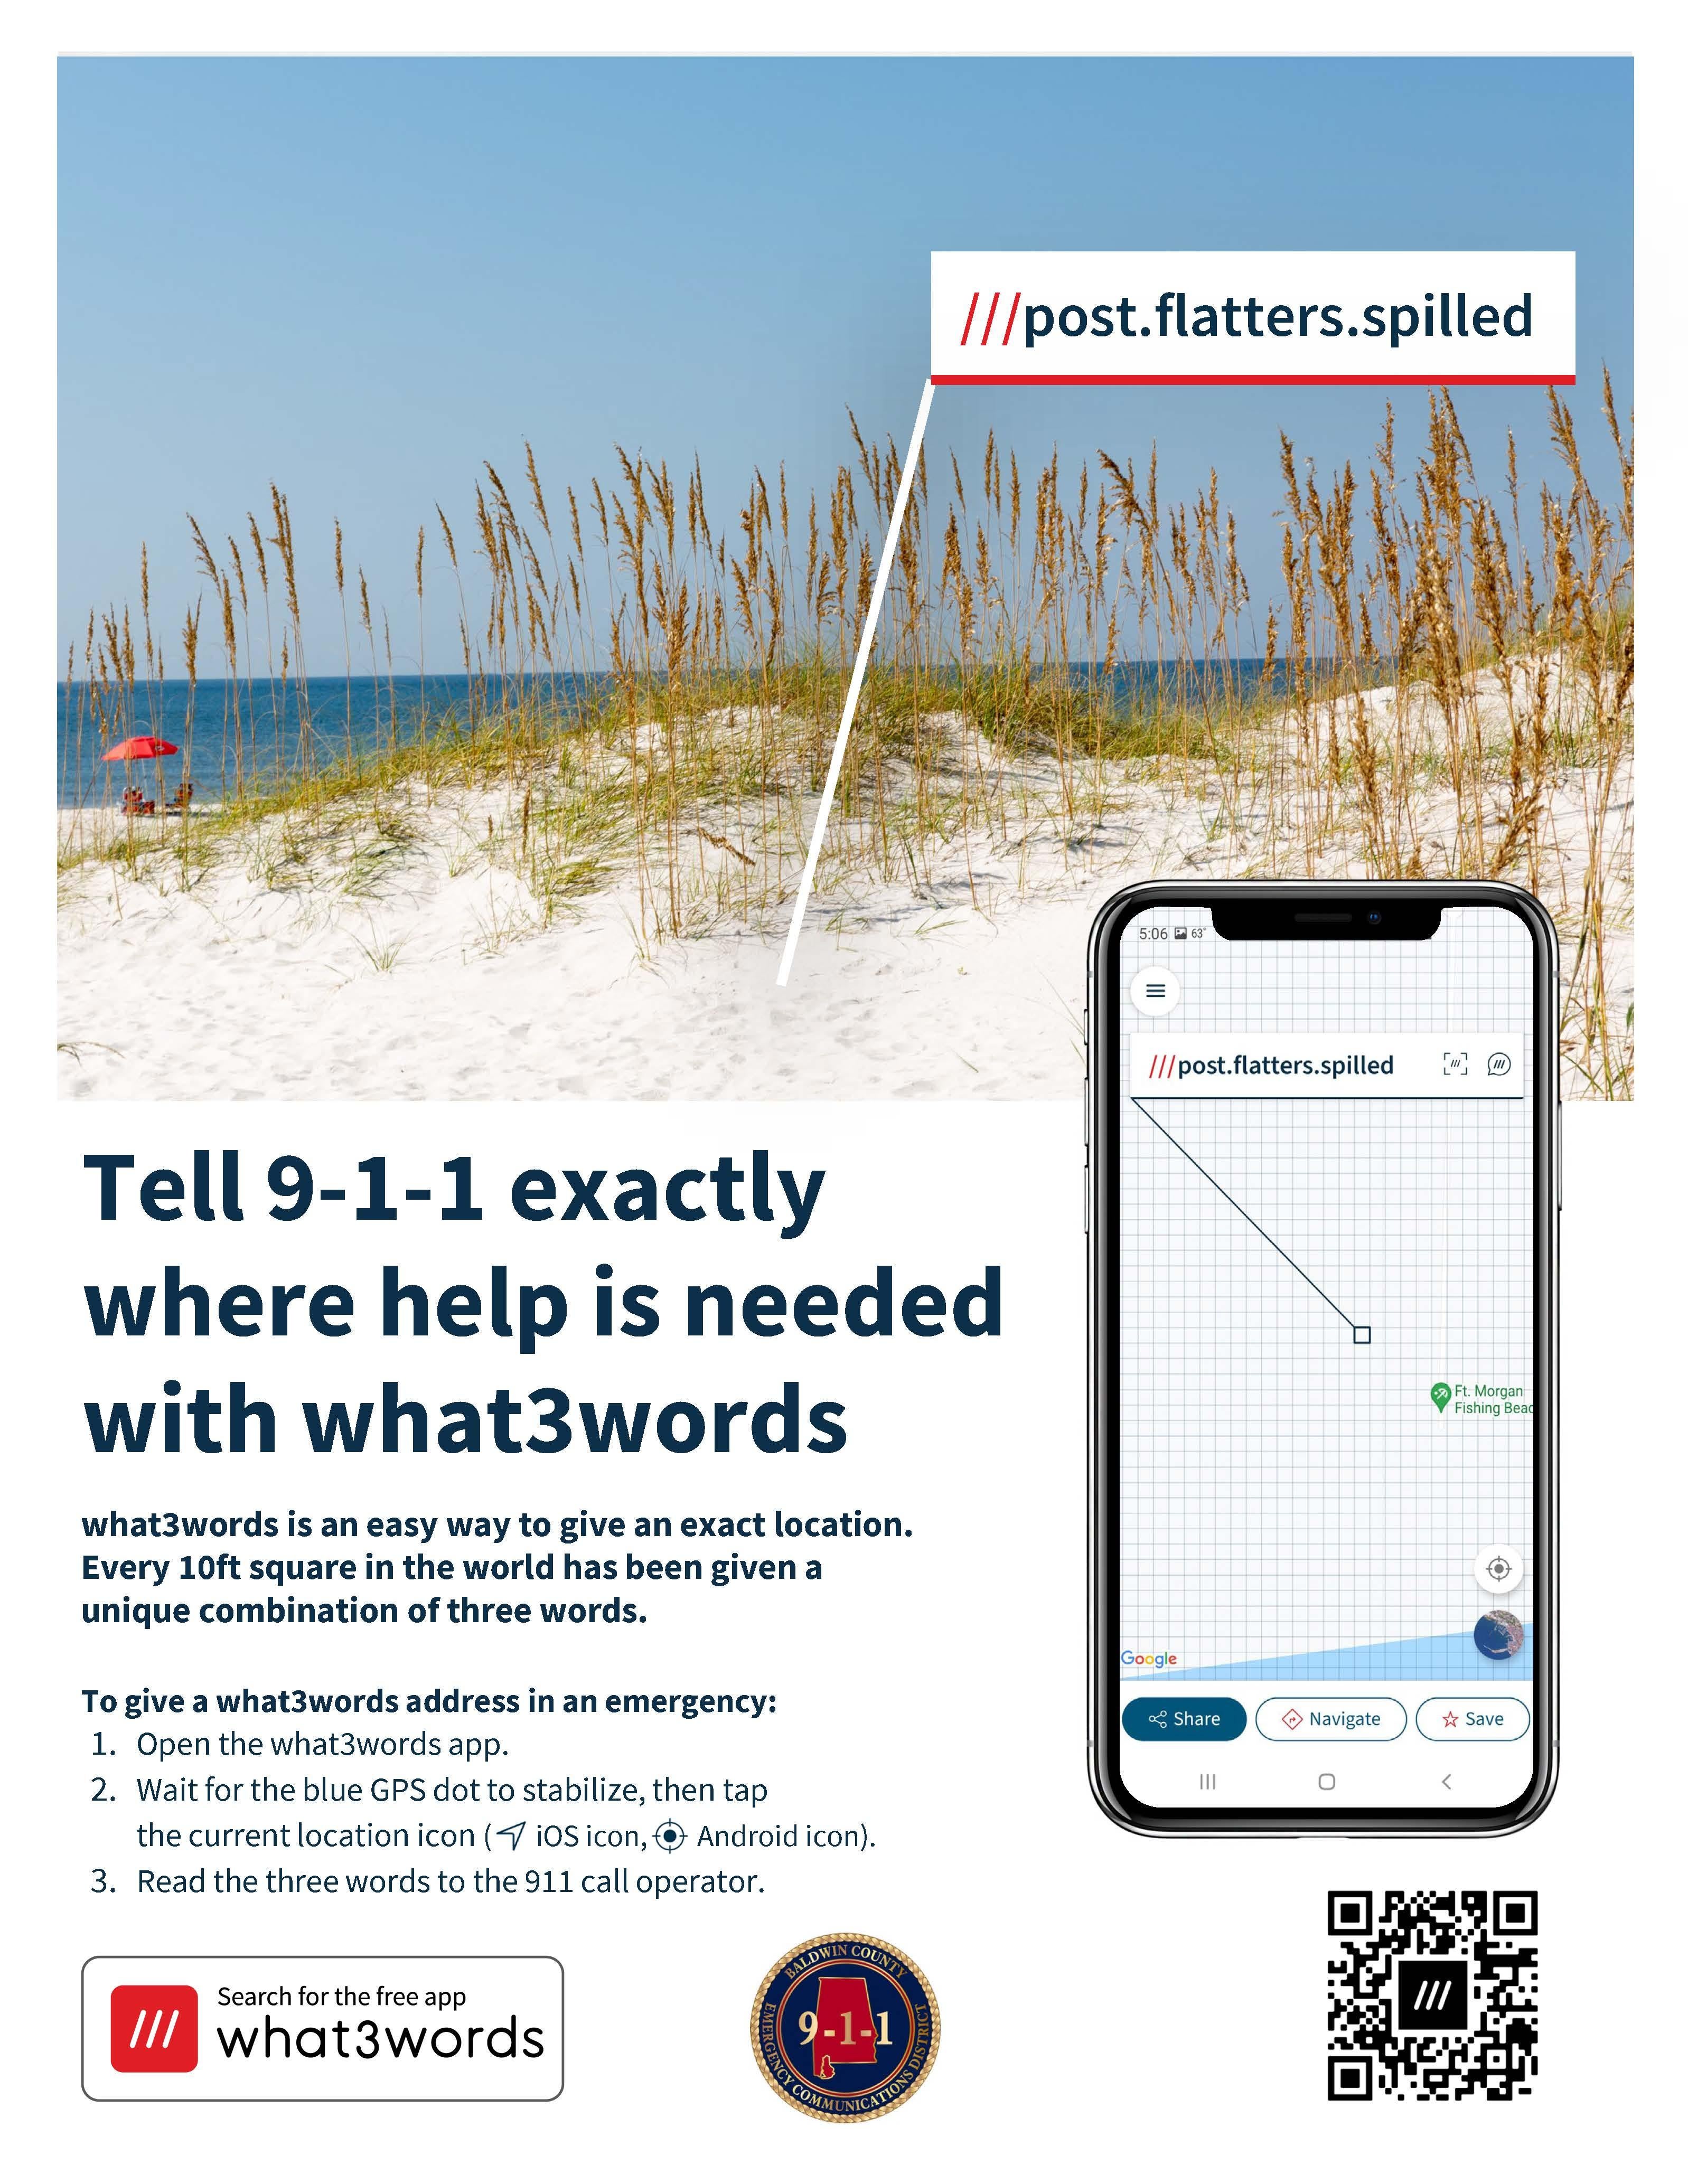 what3words flyer